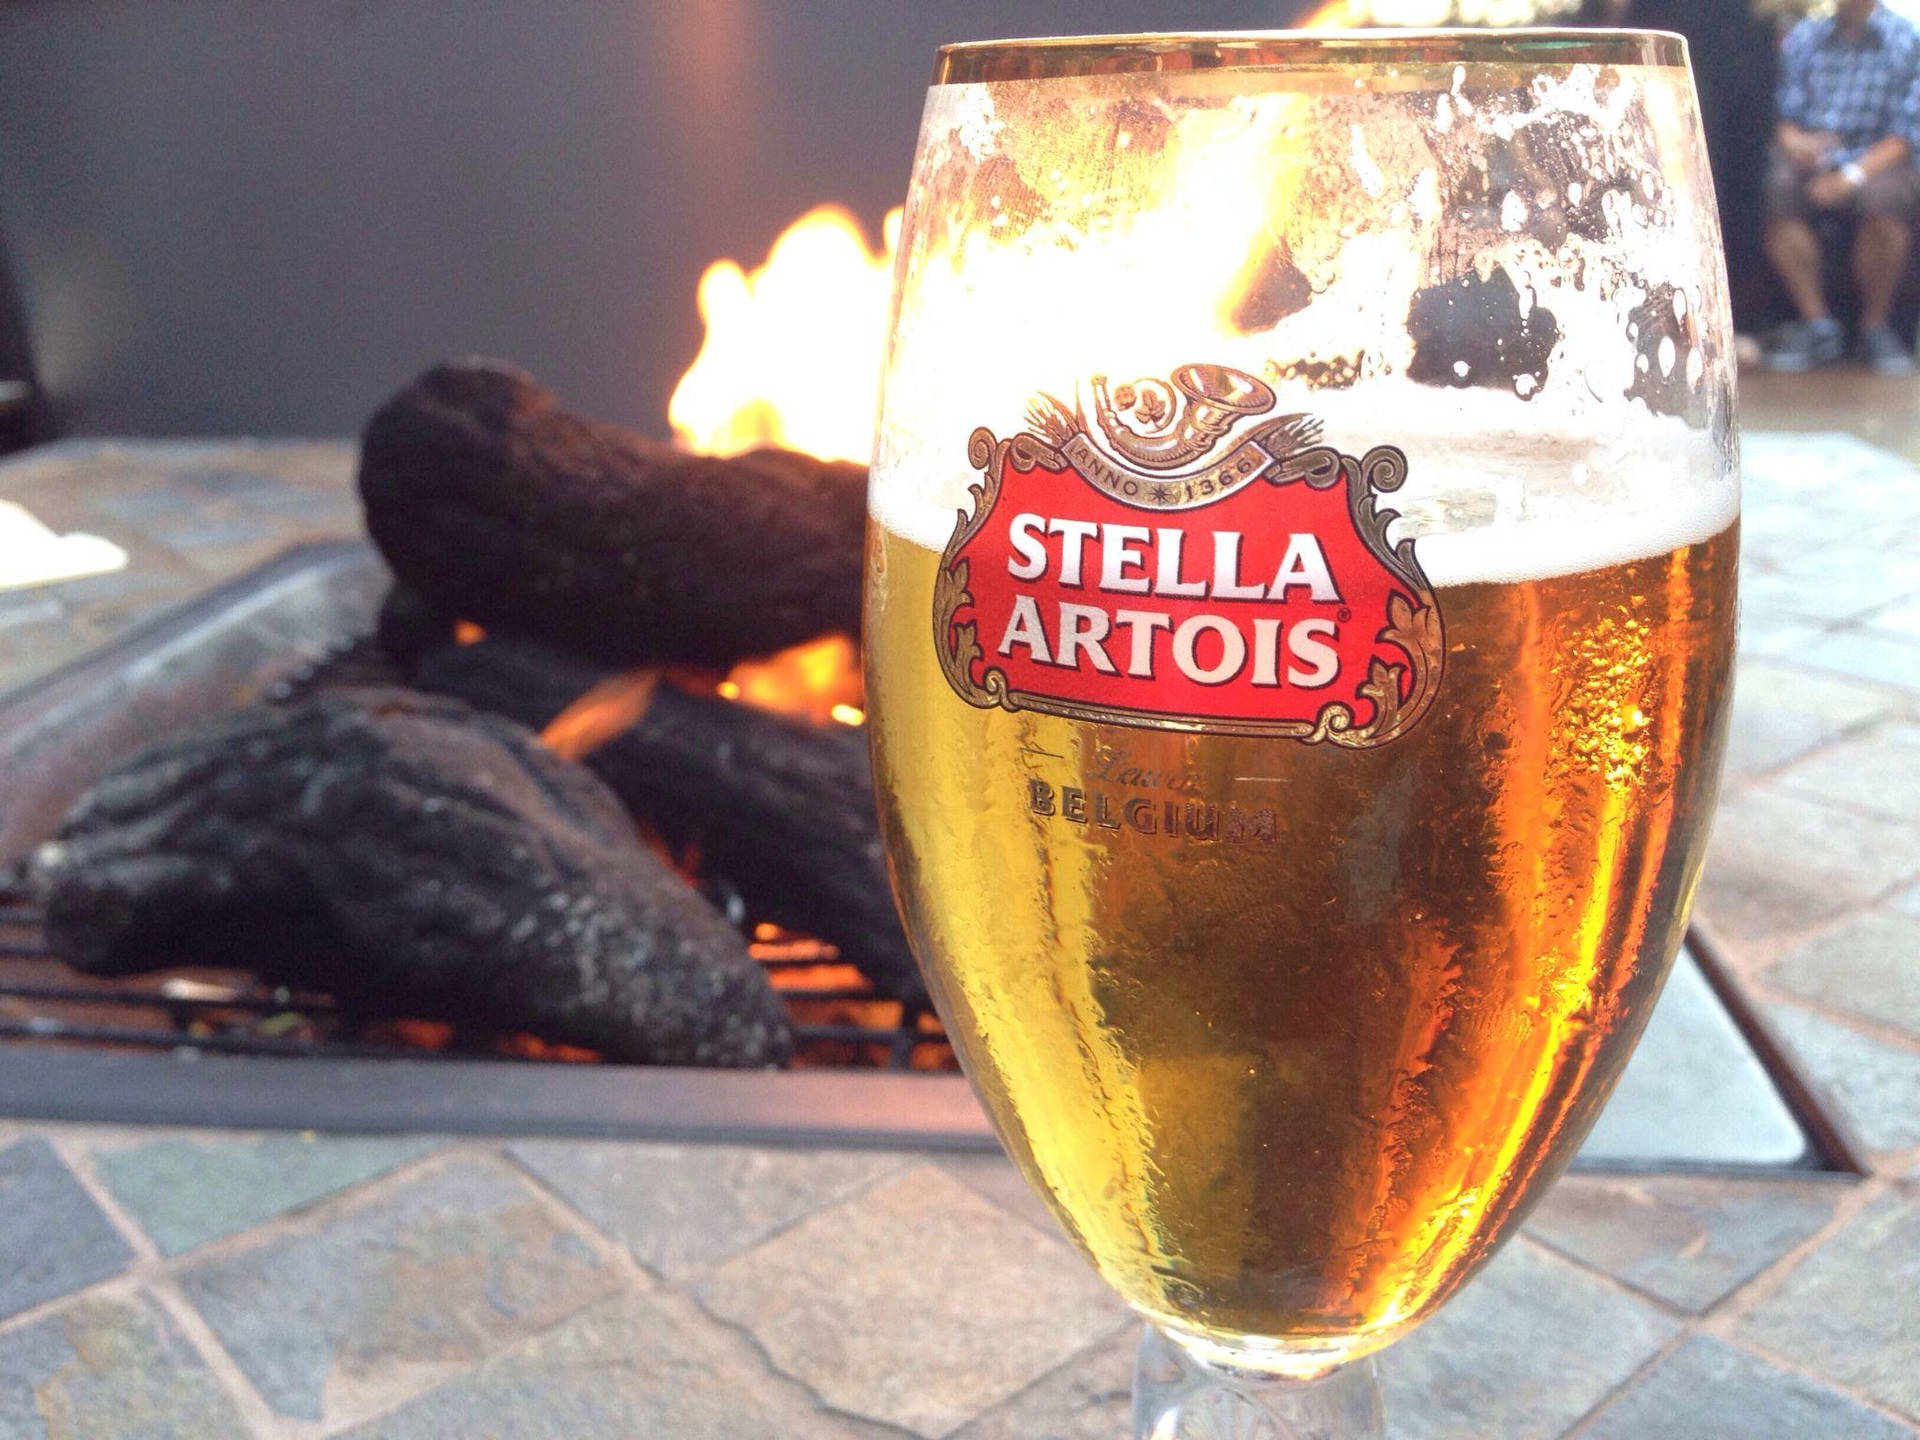 Stella Artois Beer By The Fireplace Wallpaper